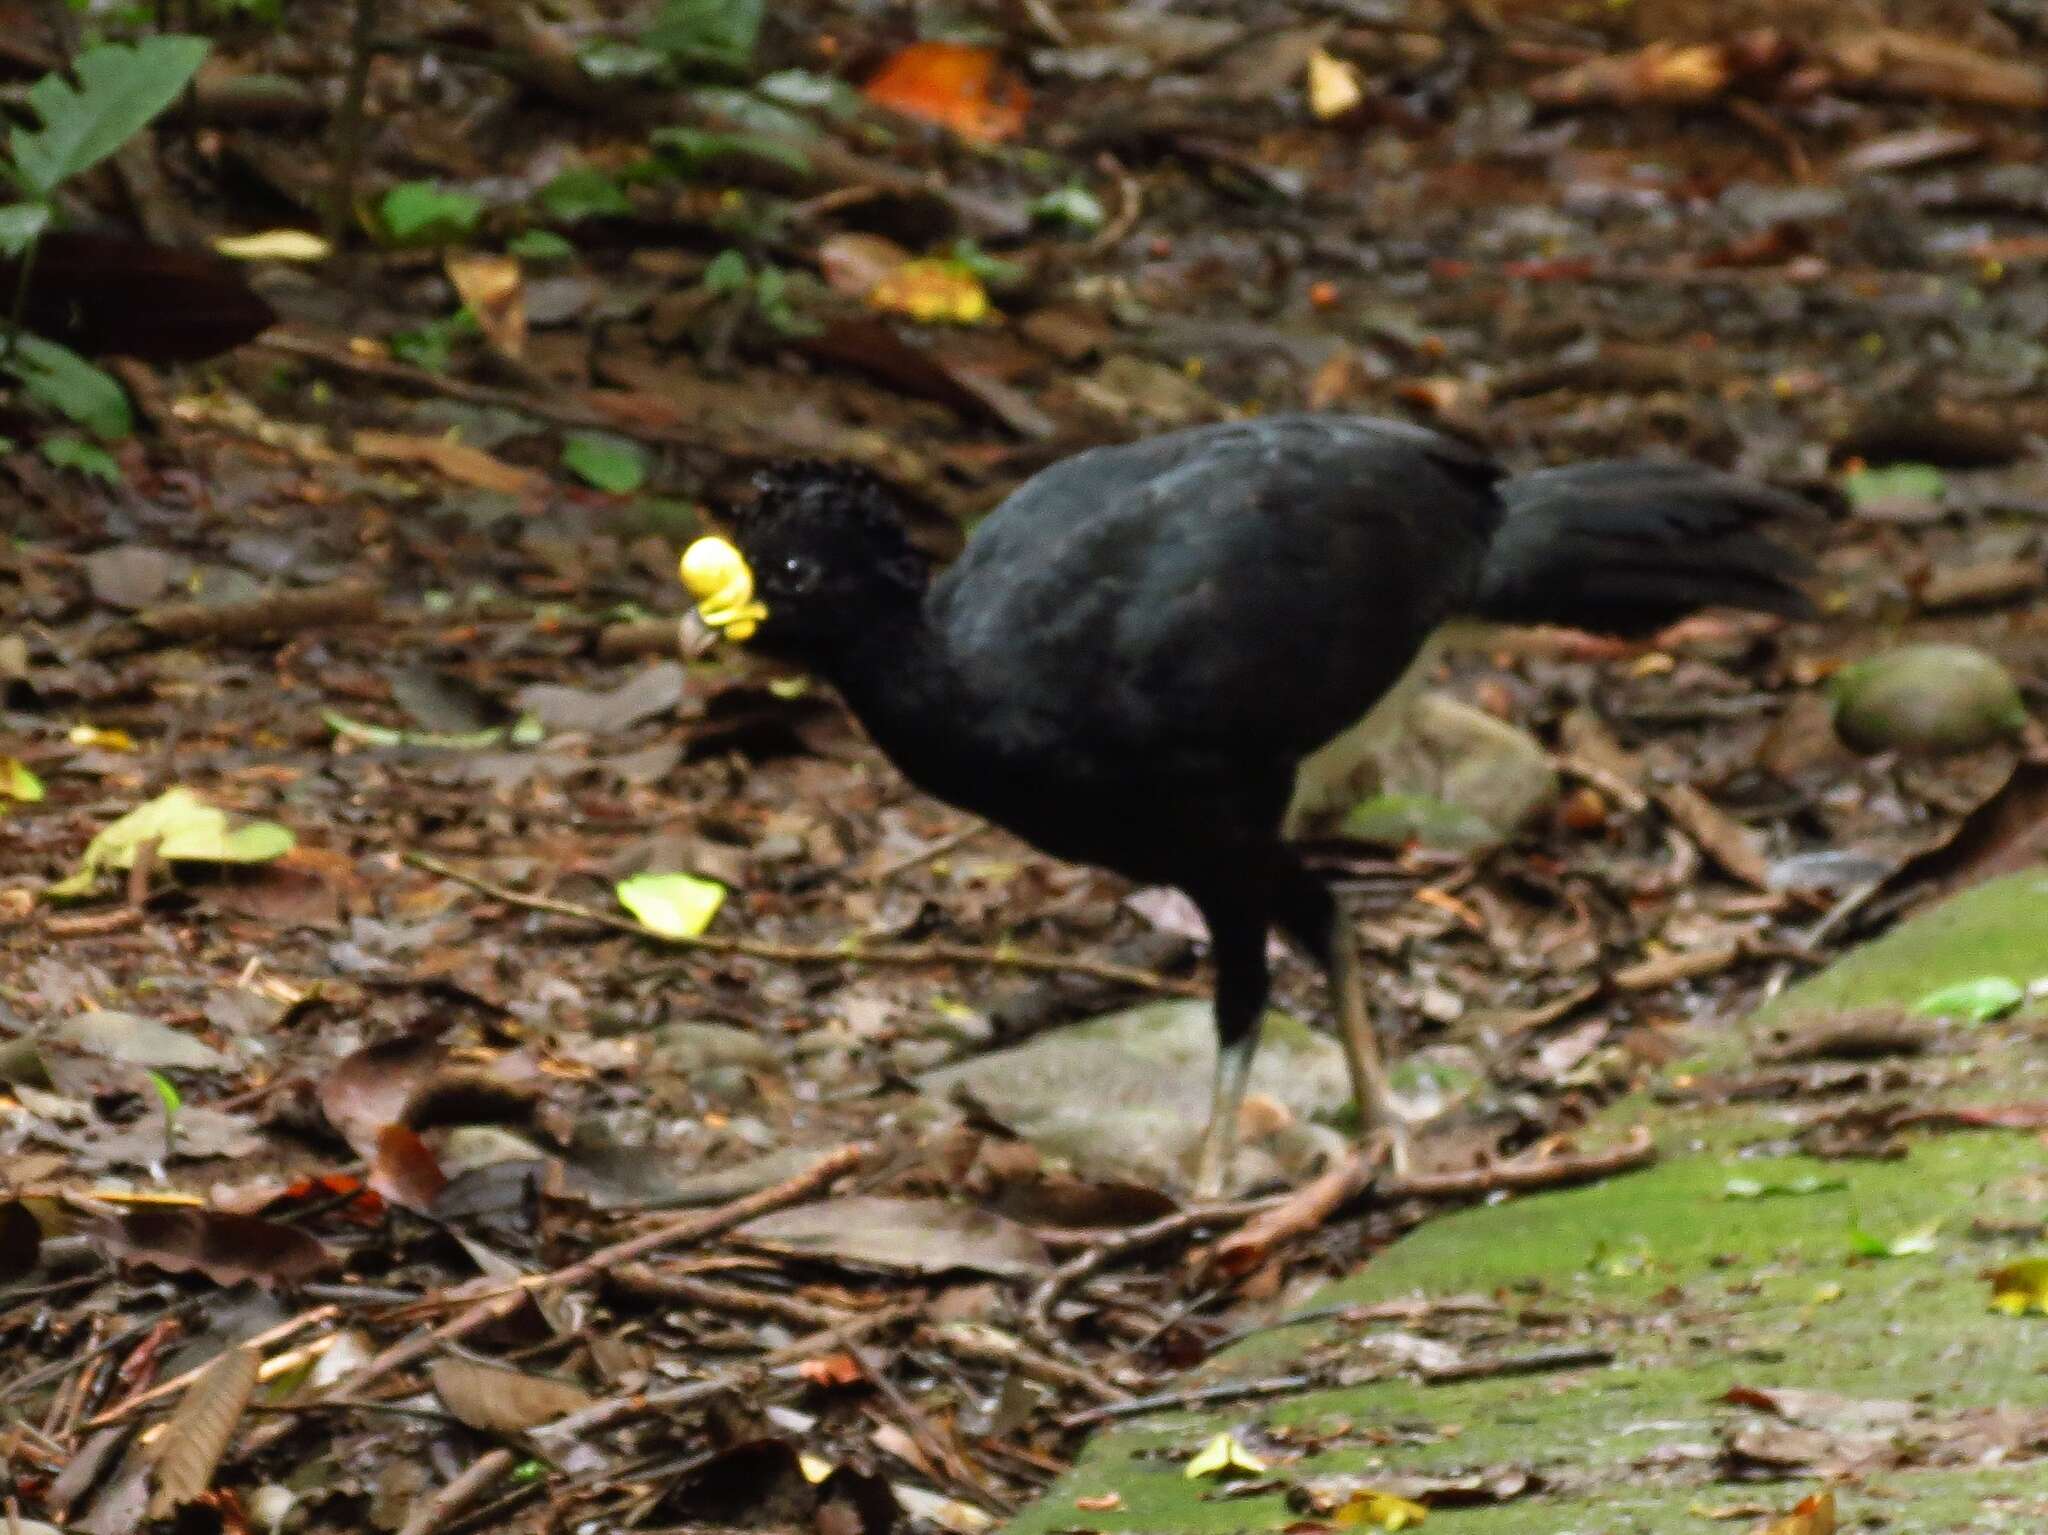 Image of Great Curassow